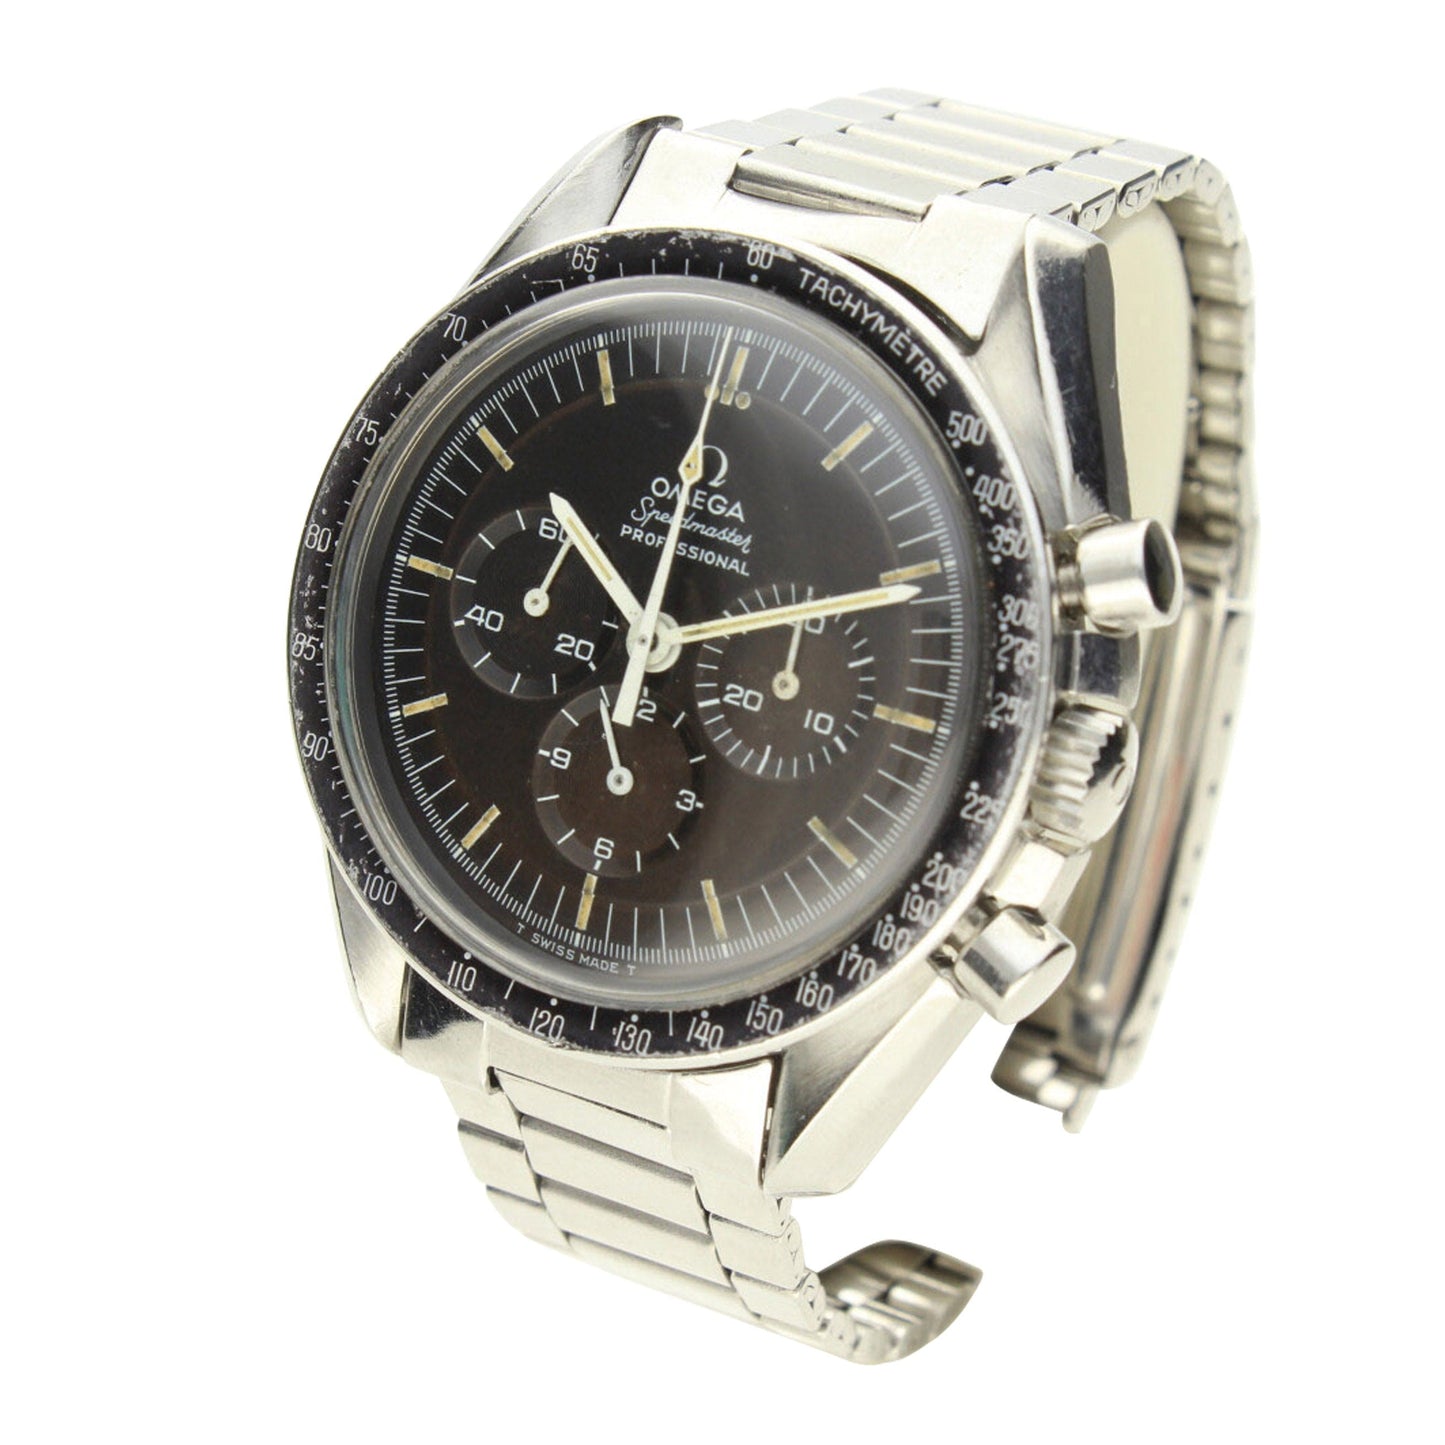 Stainless steel Speedmaster, reference 145.022 Professional chronograph wristwatch. Made 1971